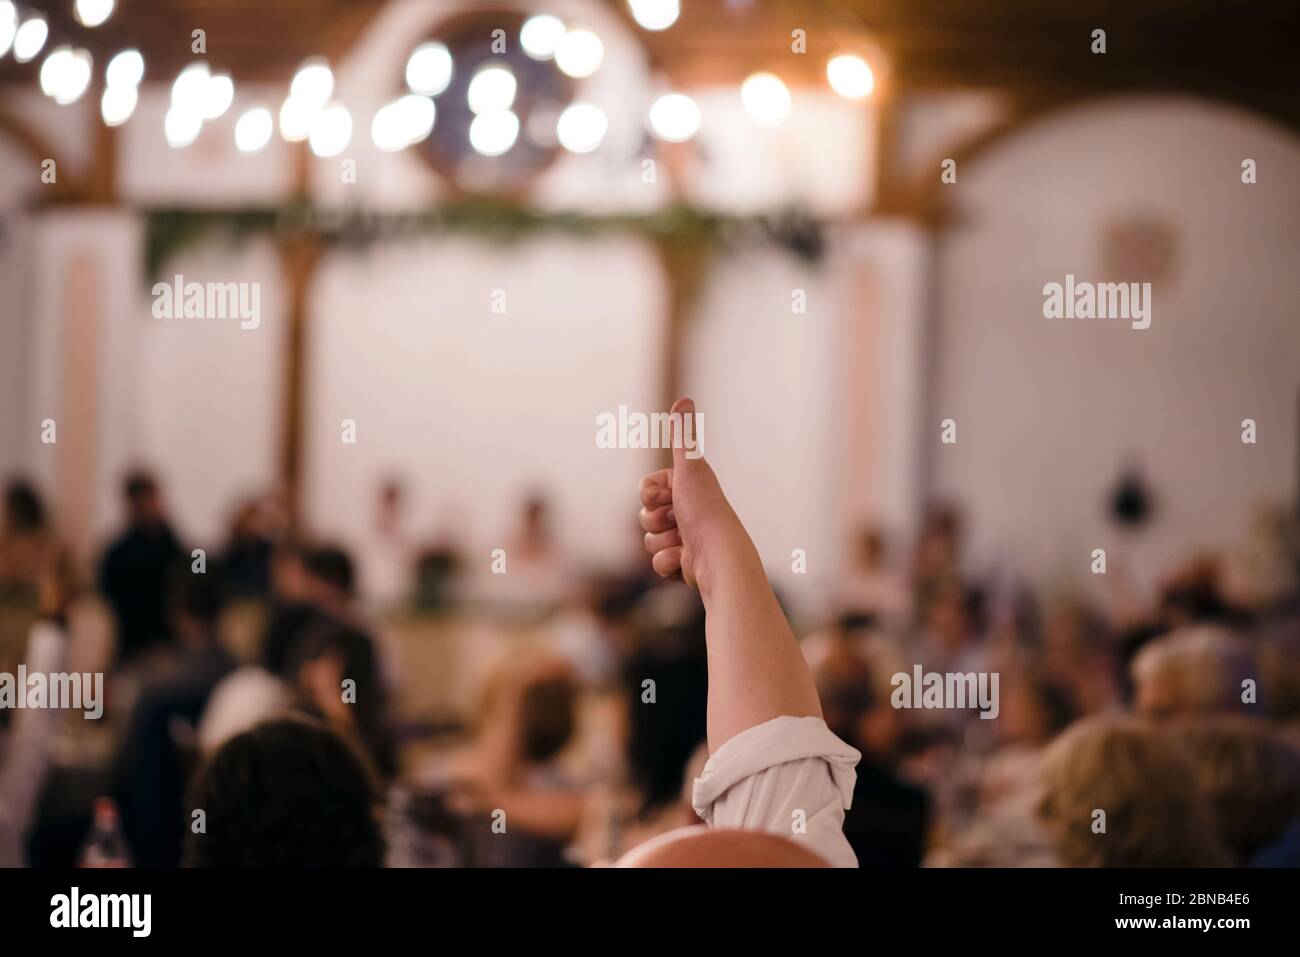 Male big thumb up against blurred background with copy space Stock Photo